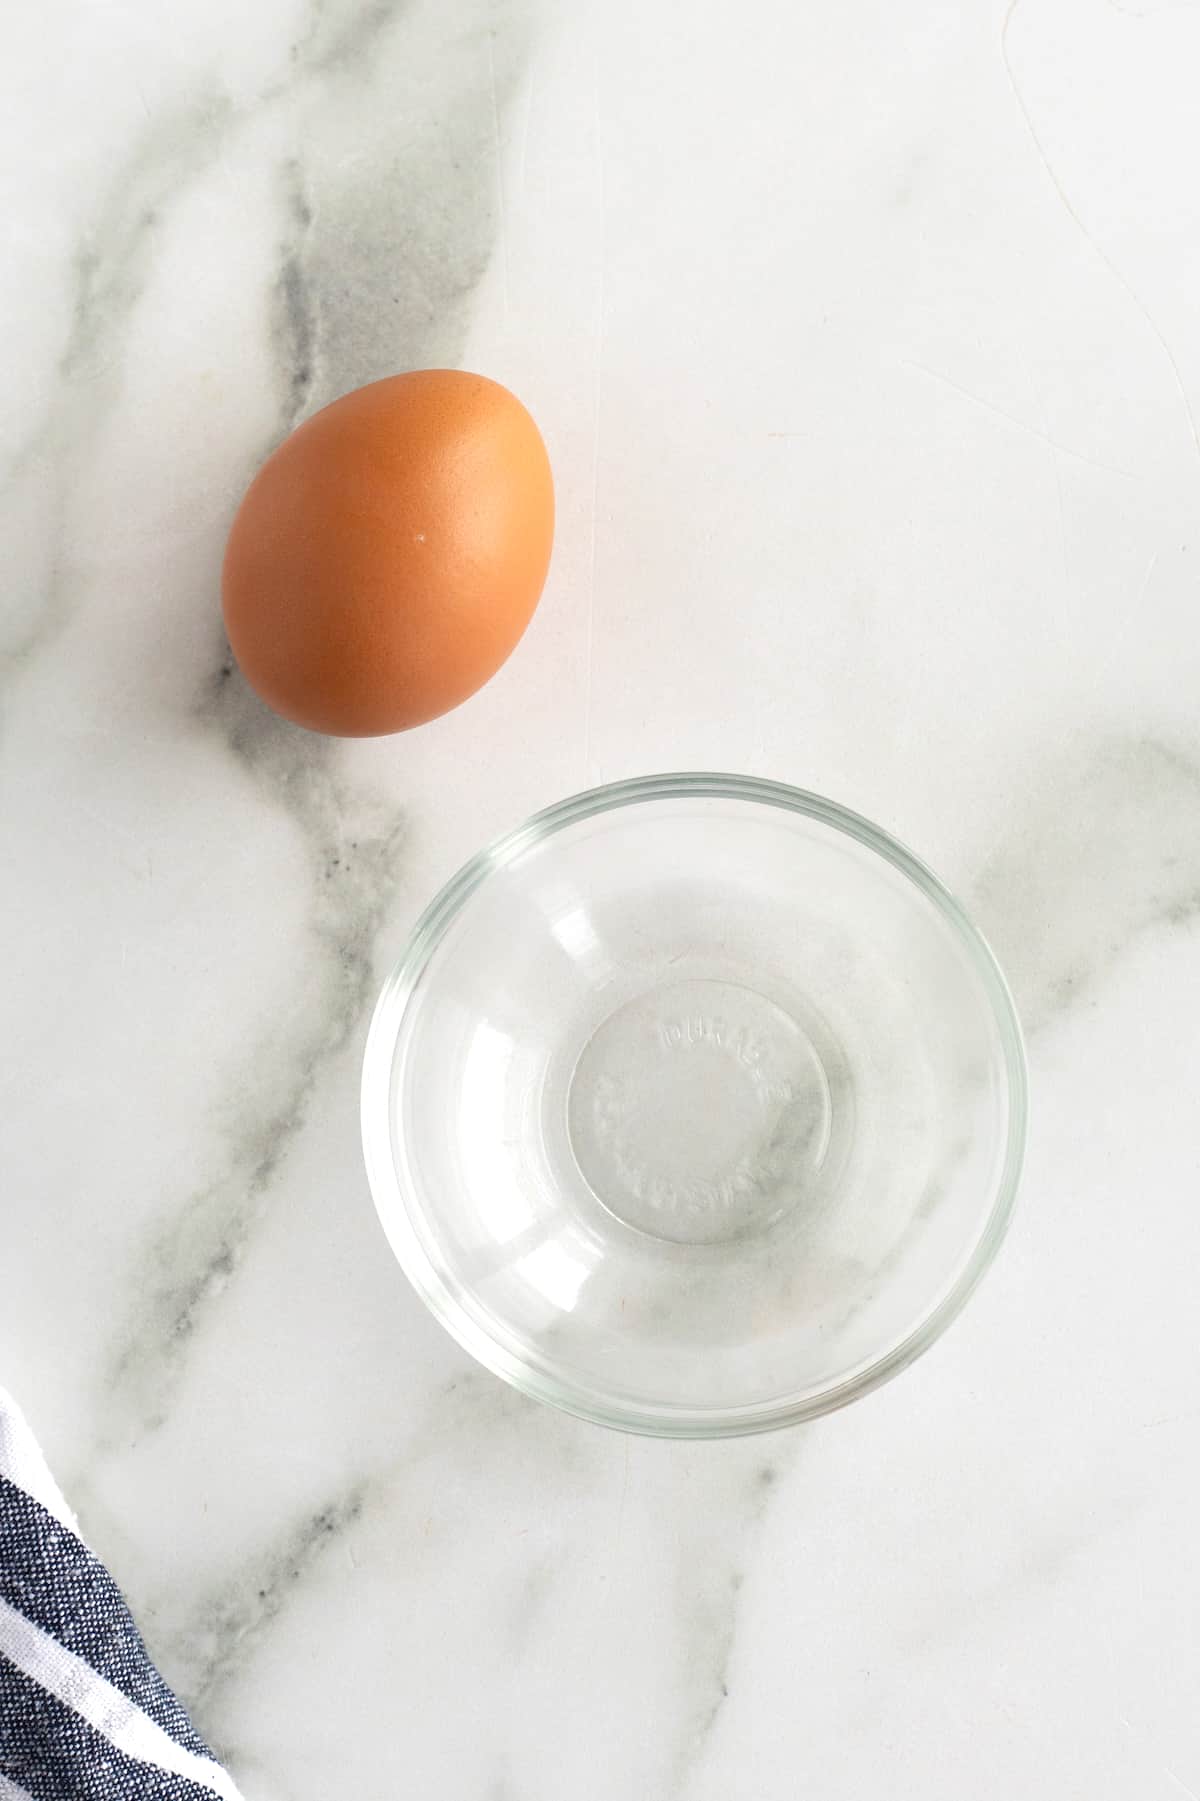 How to Make an Egg Wash by The BakerMama